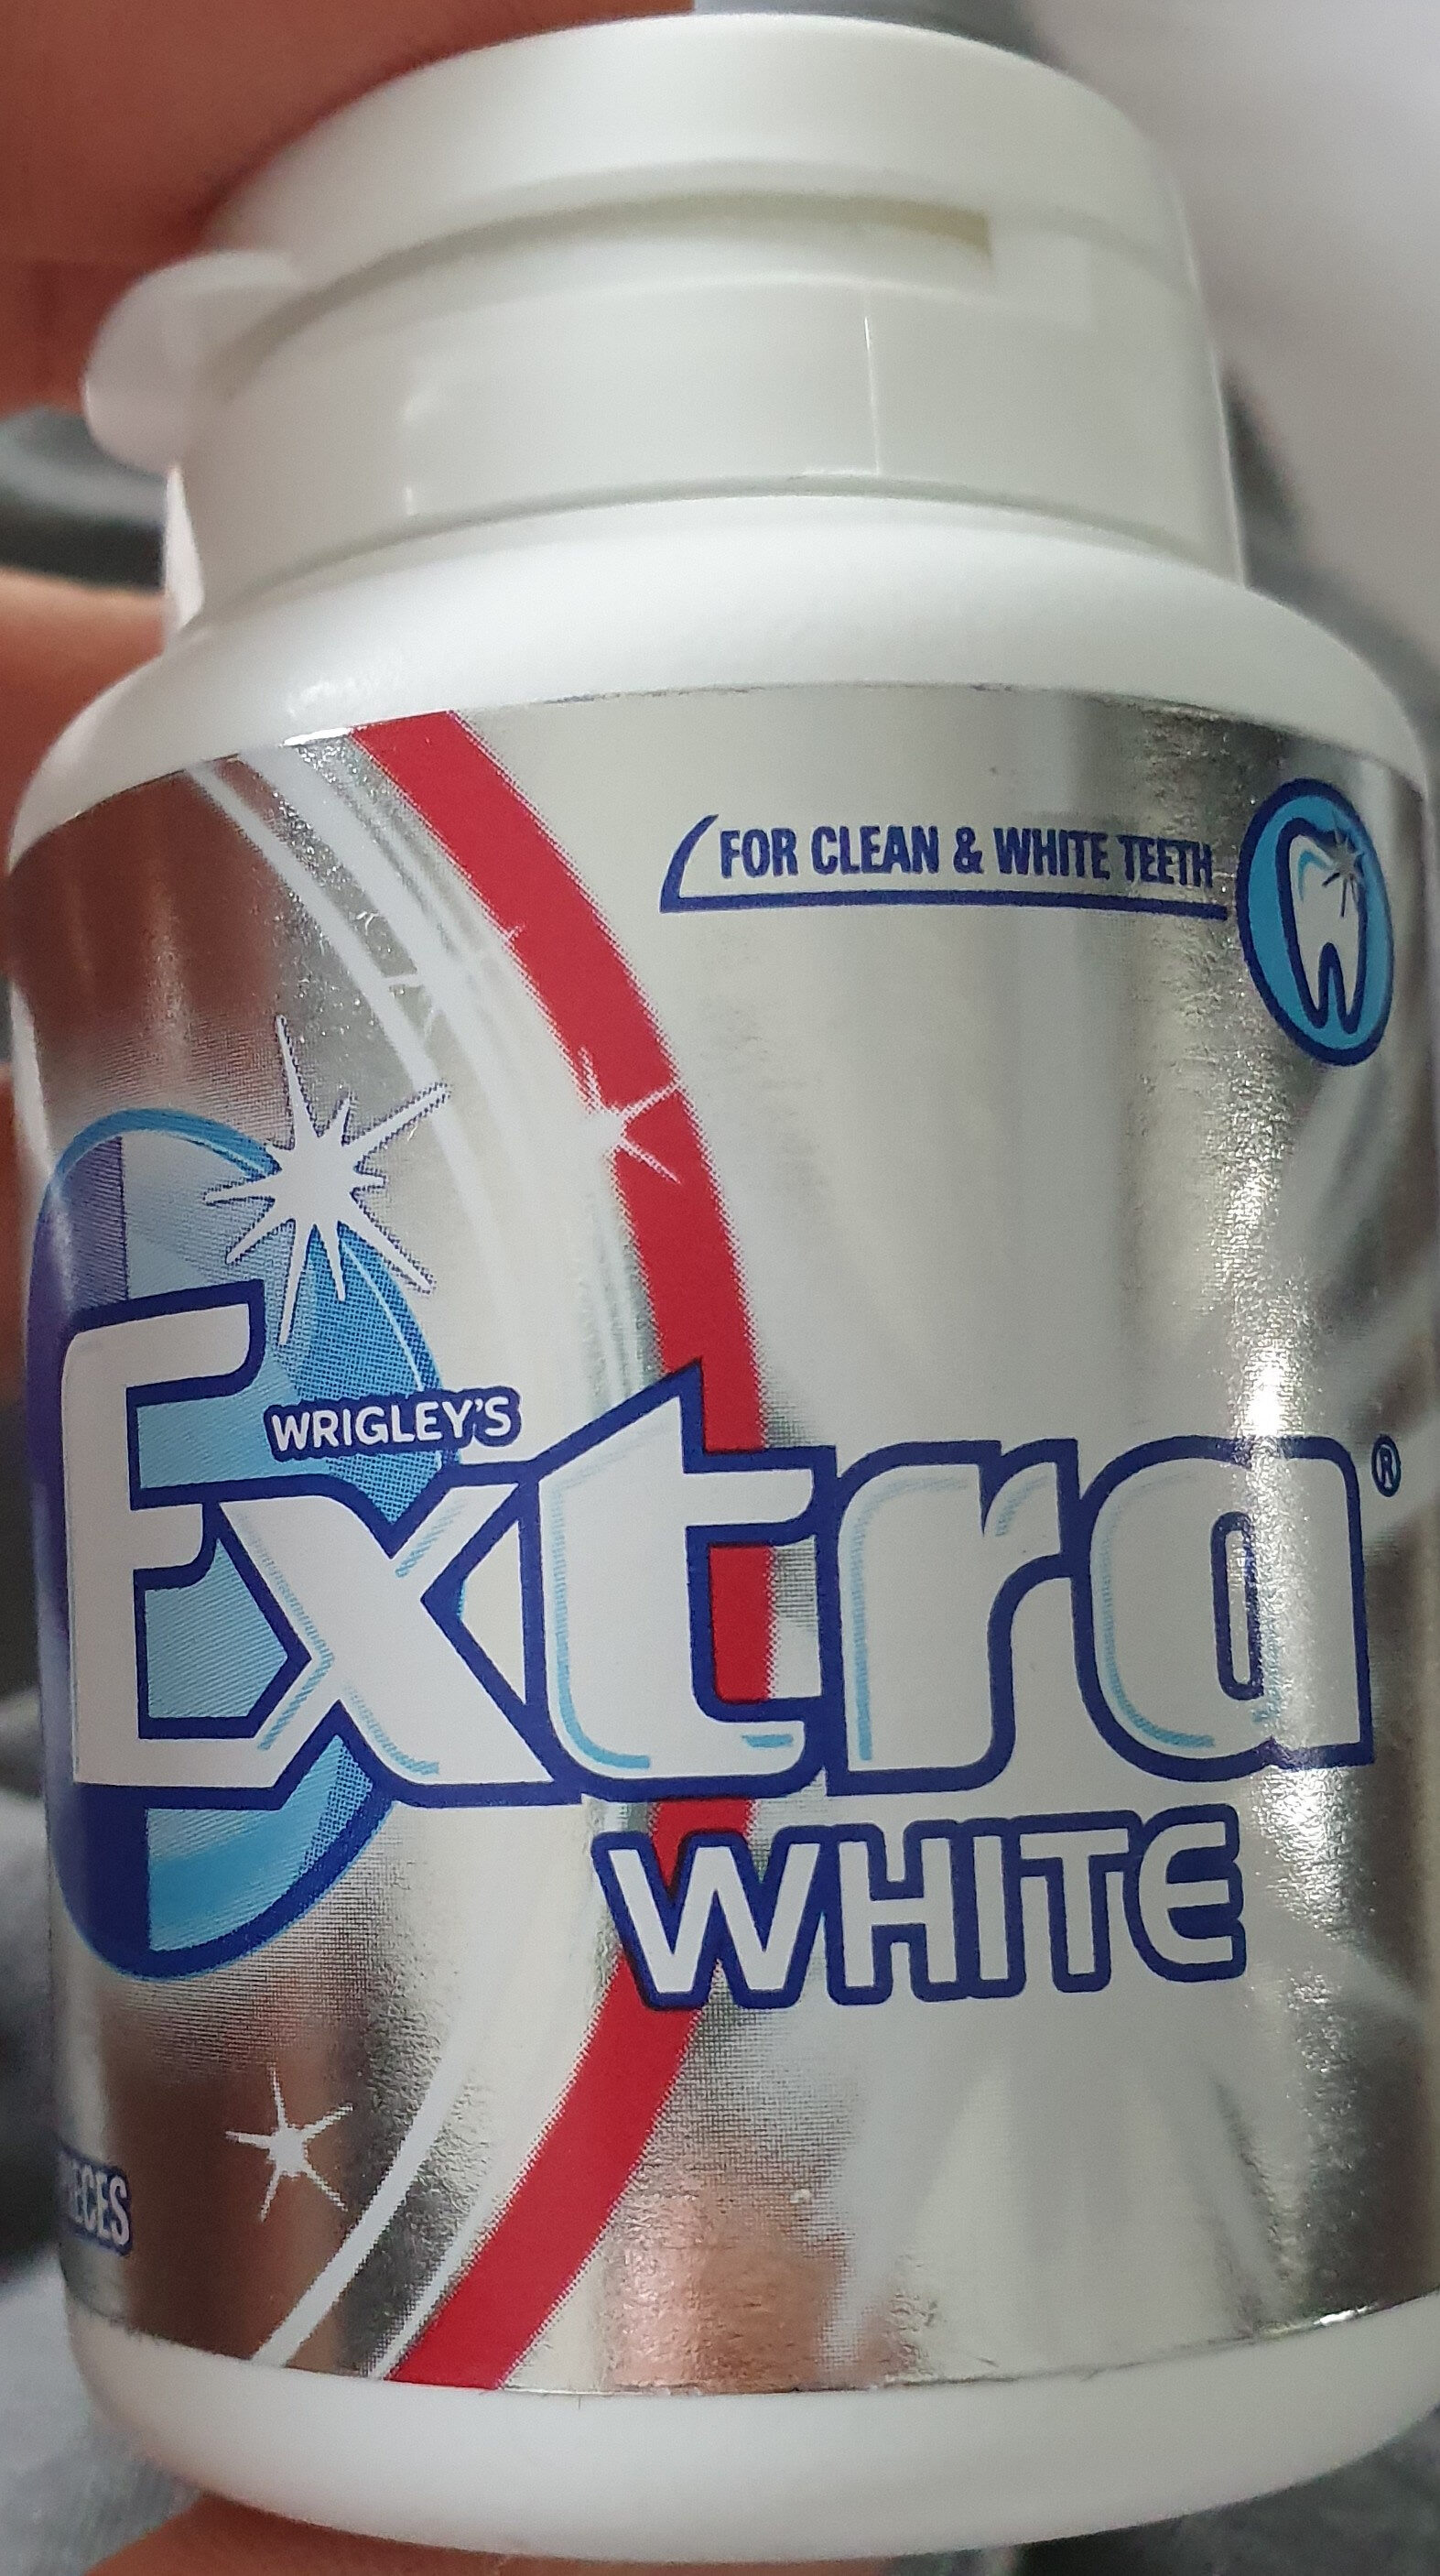 Extra White - Product - en